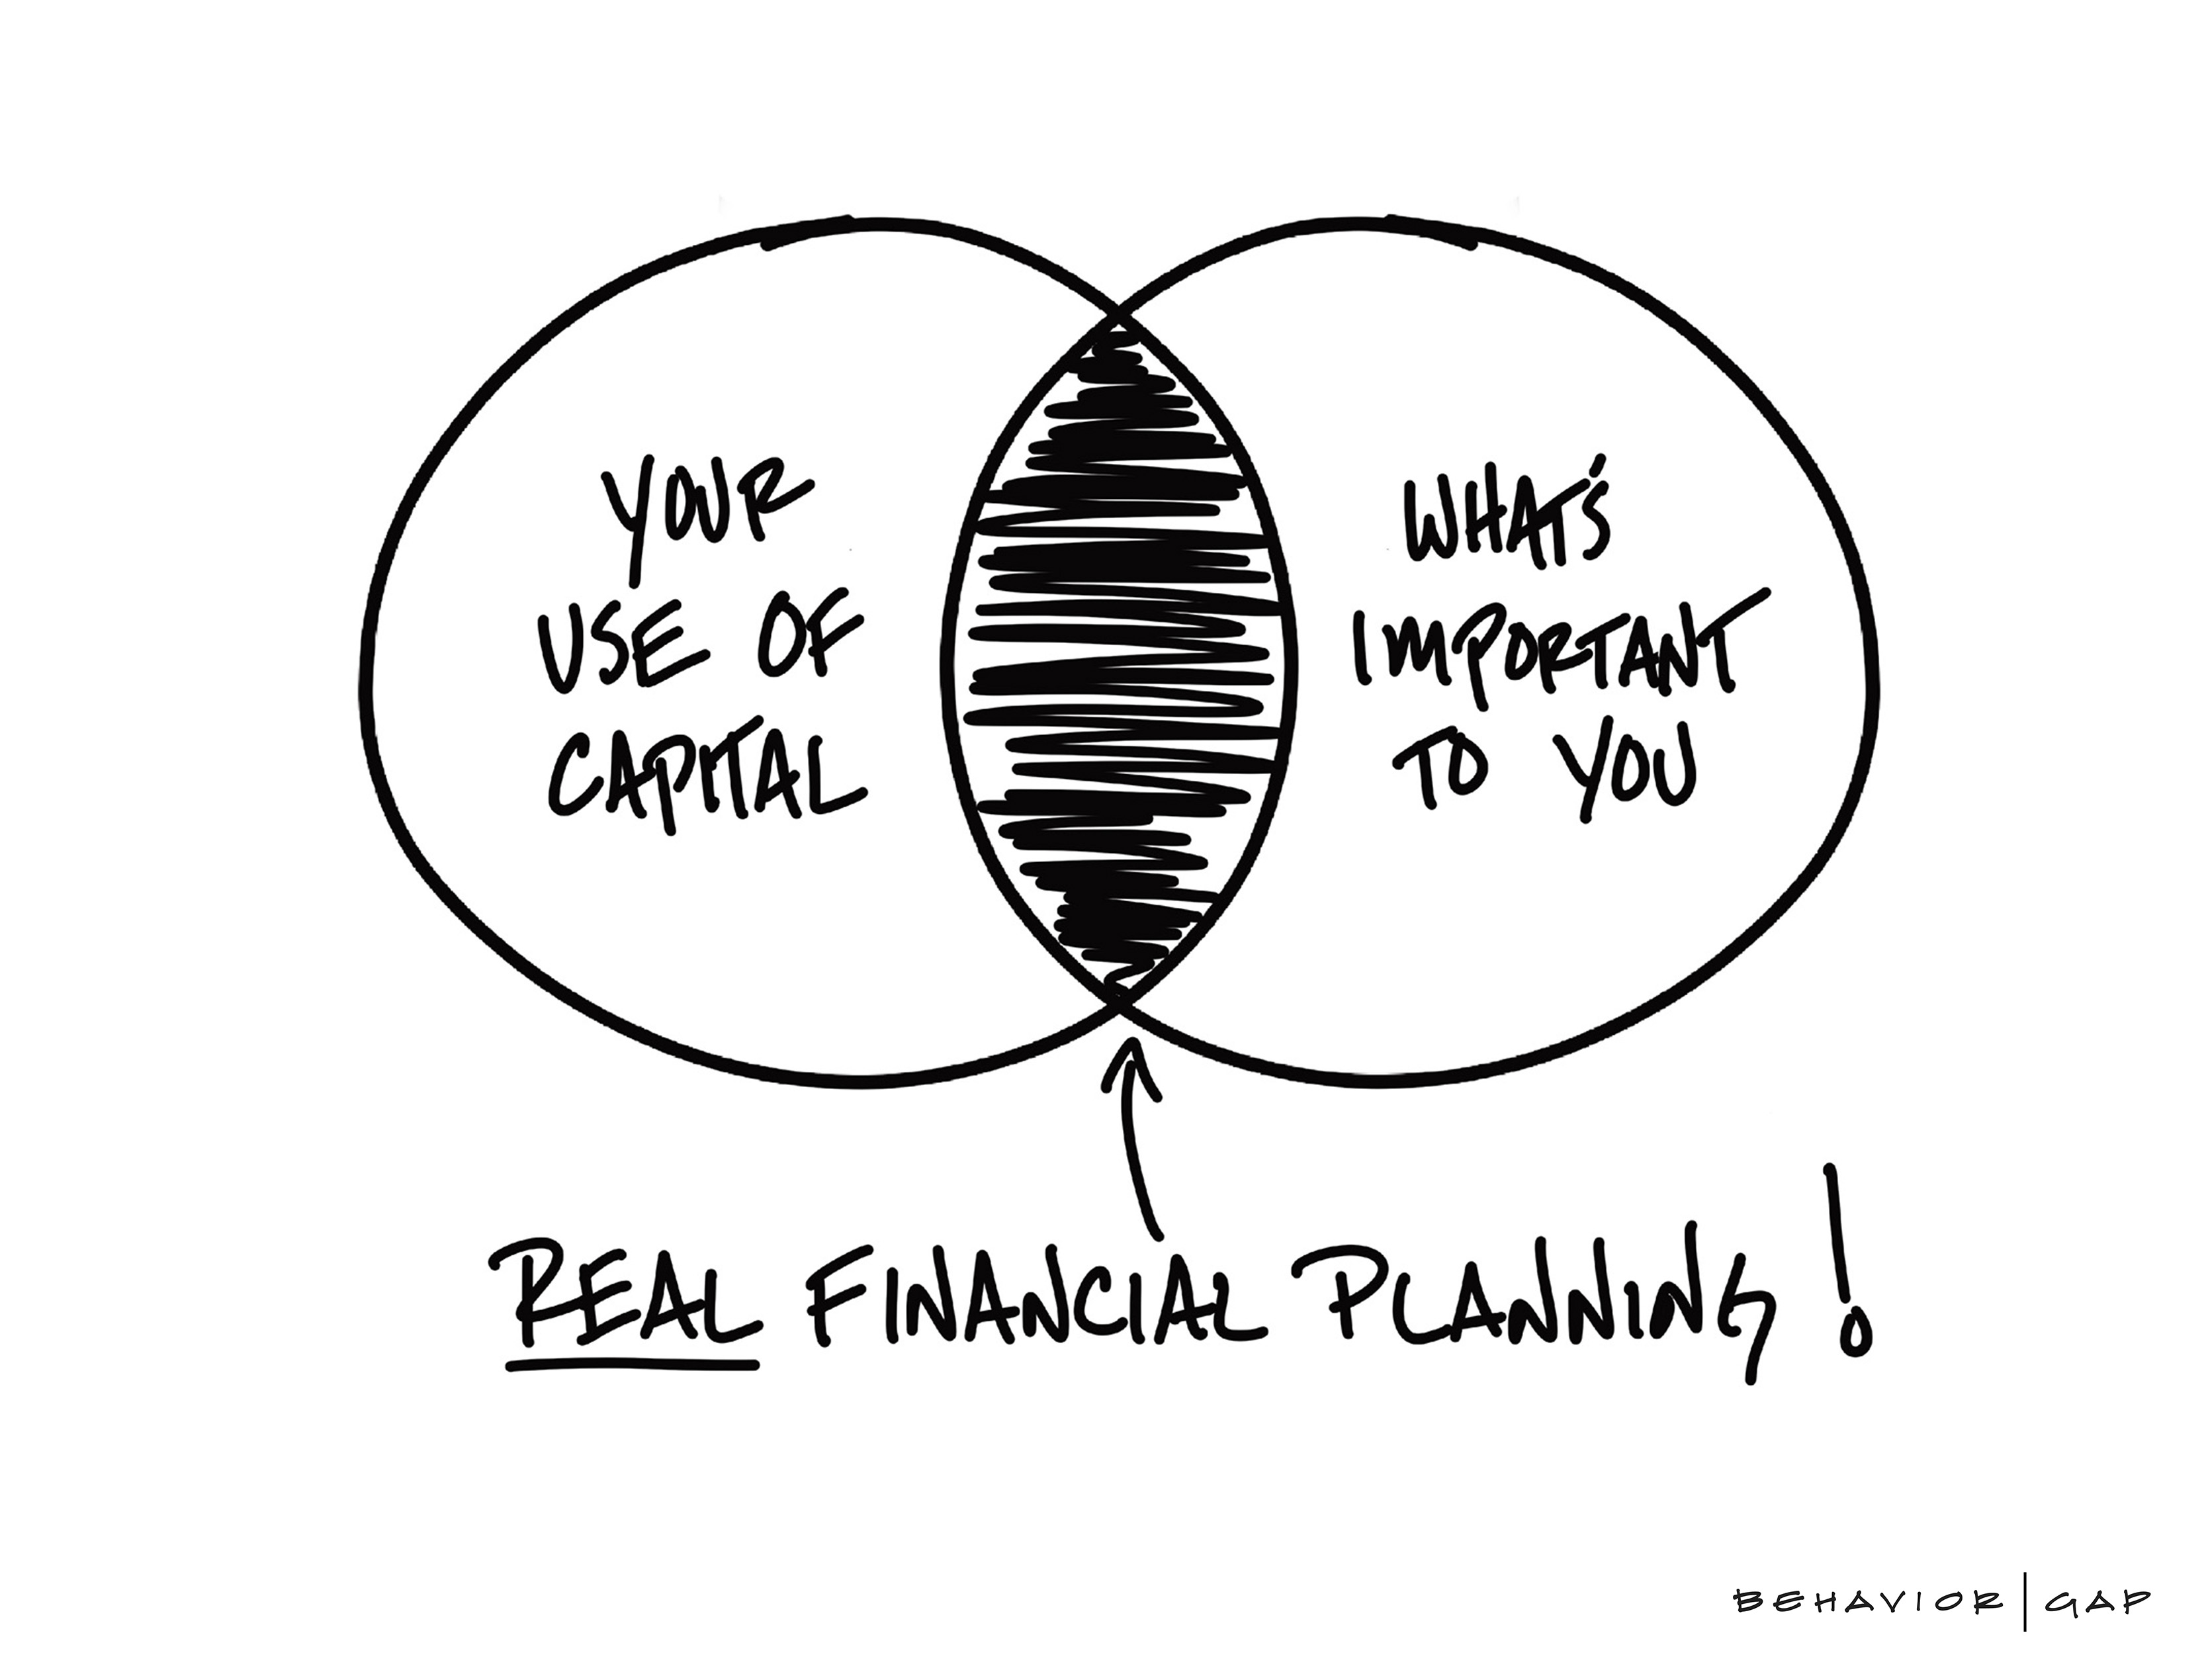 Use of capital and planning